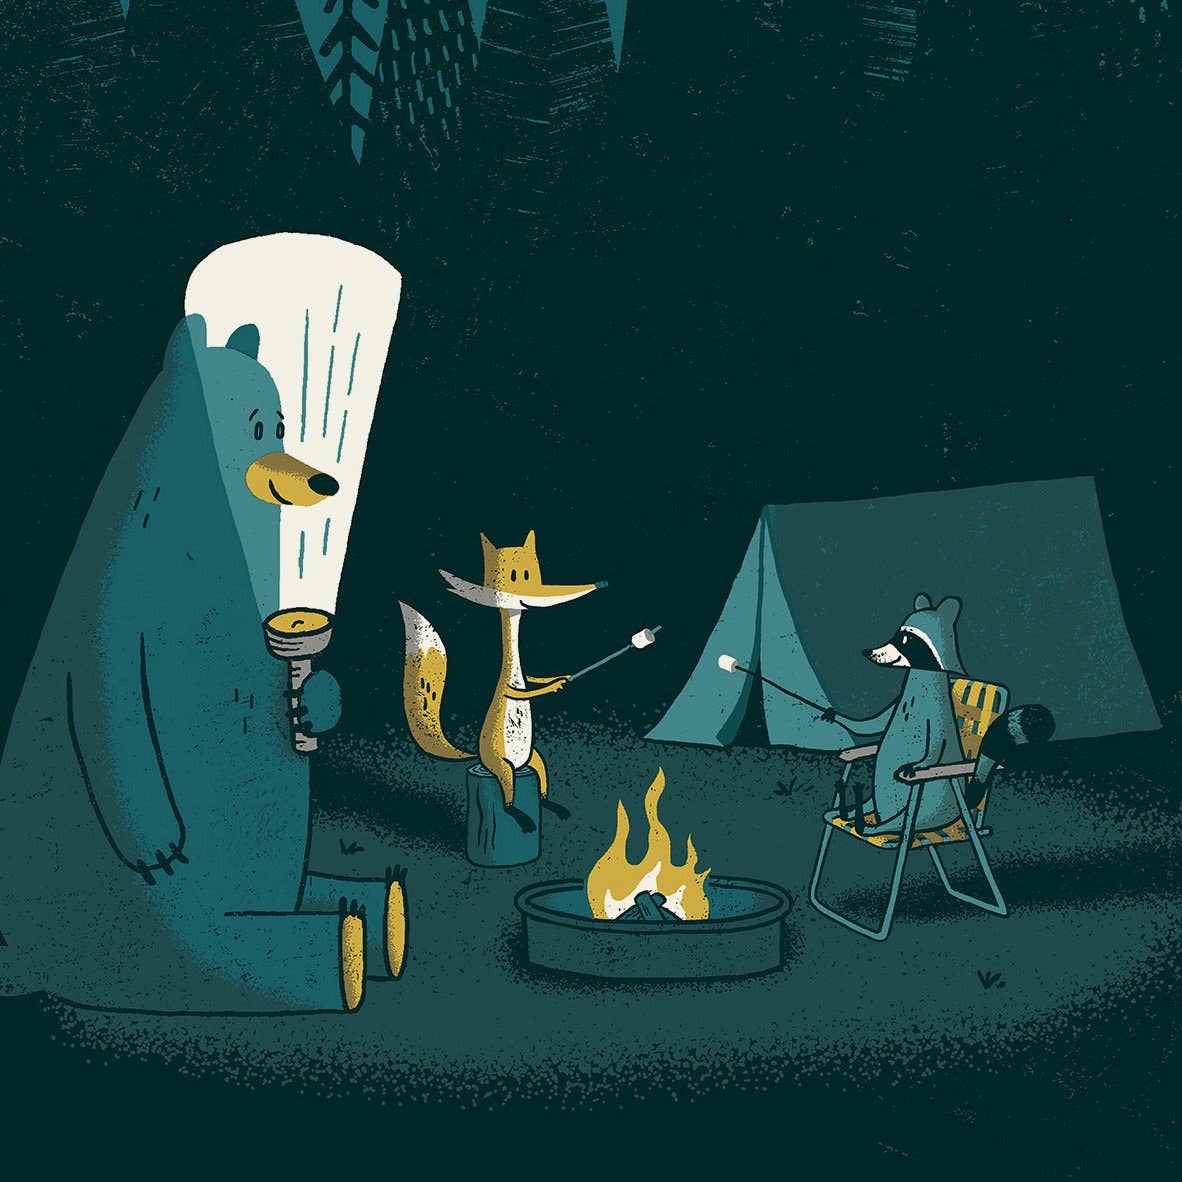 Camping Out Screen Print